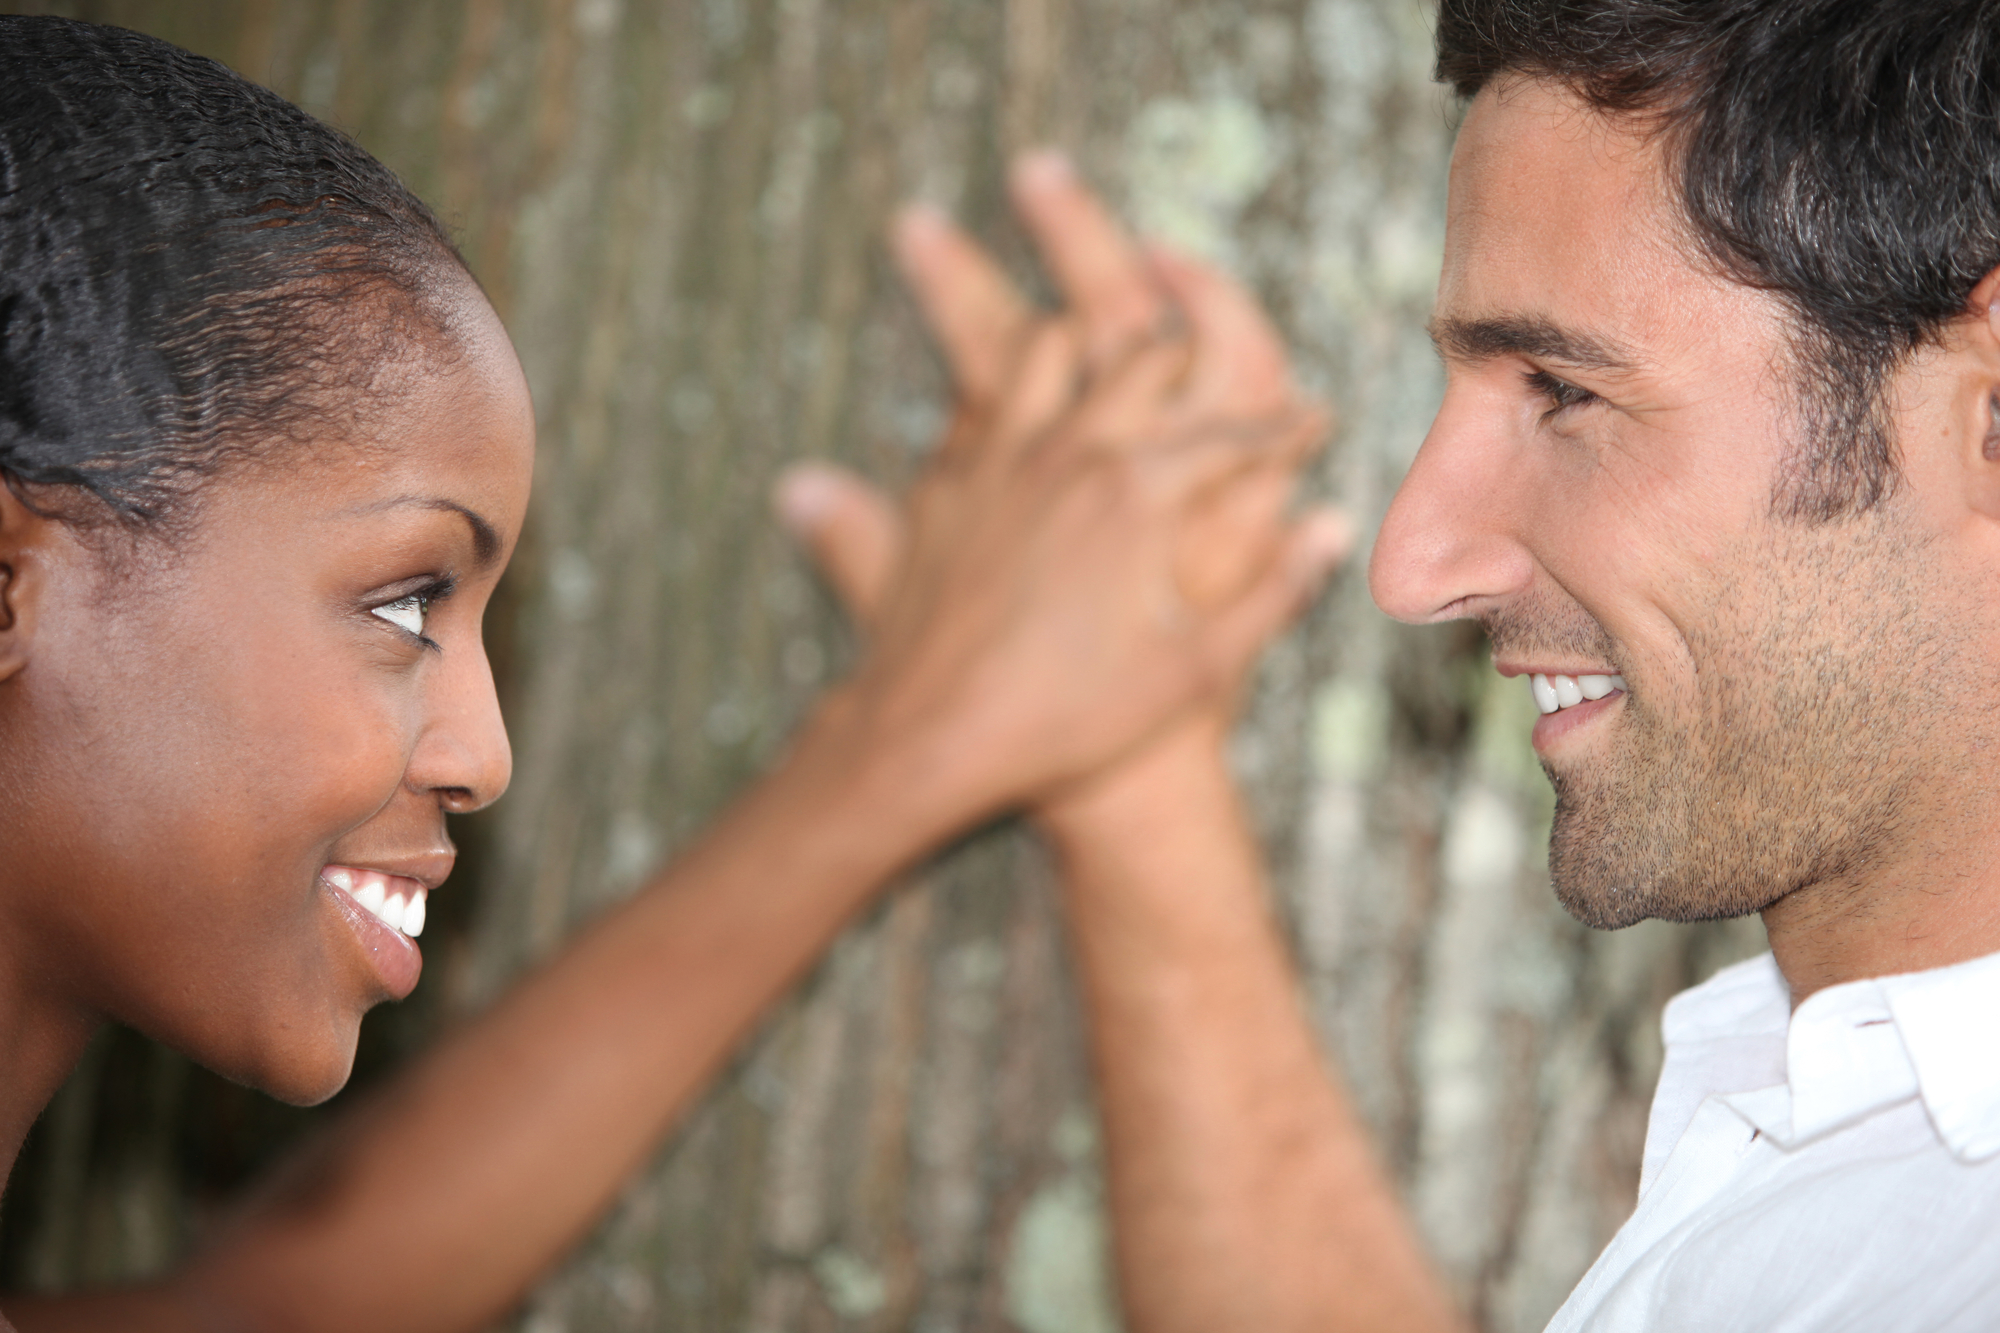 Do you want to be exclusively dating your guy? Look for these signs that you're ready for an exclusive relationship.